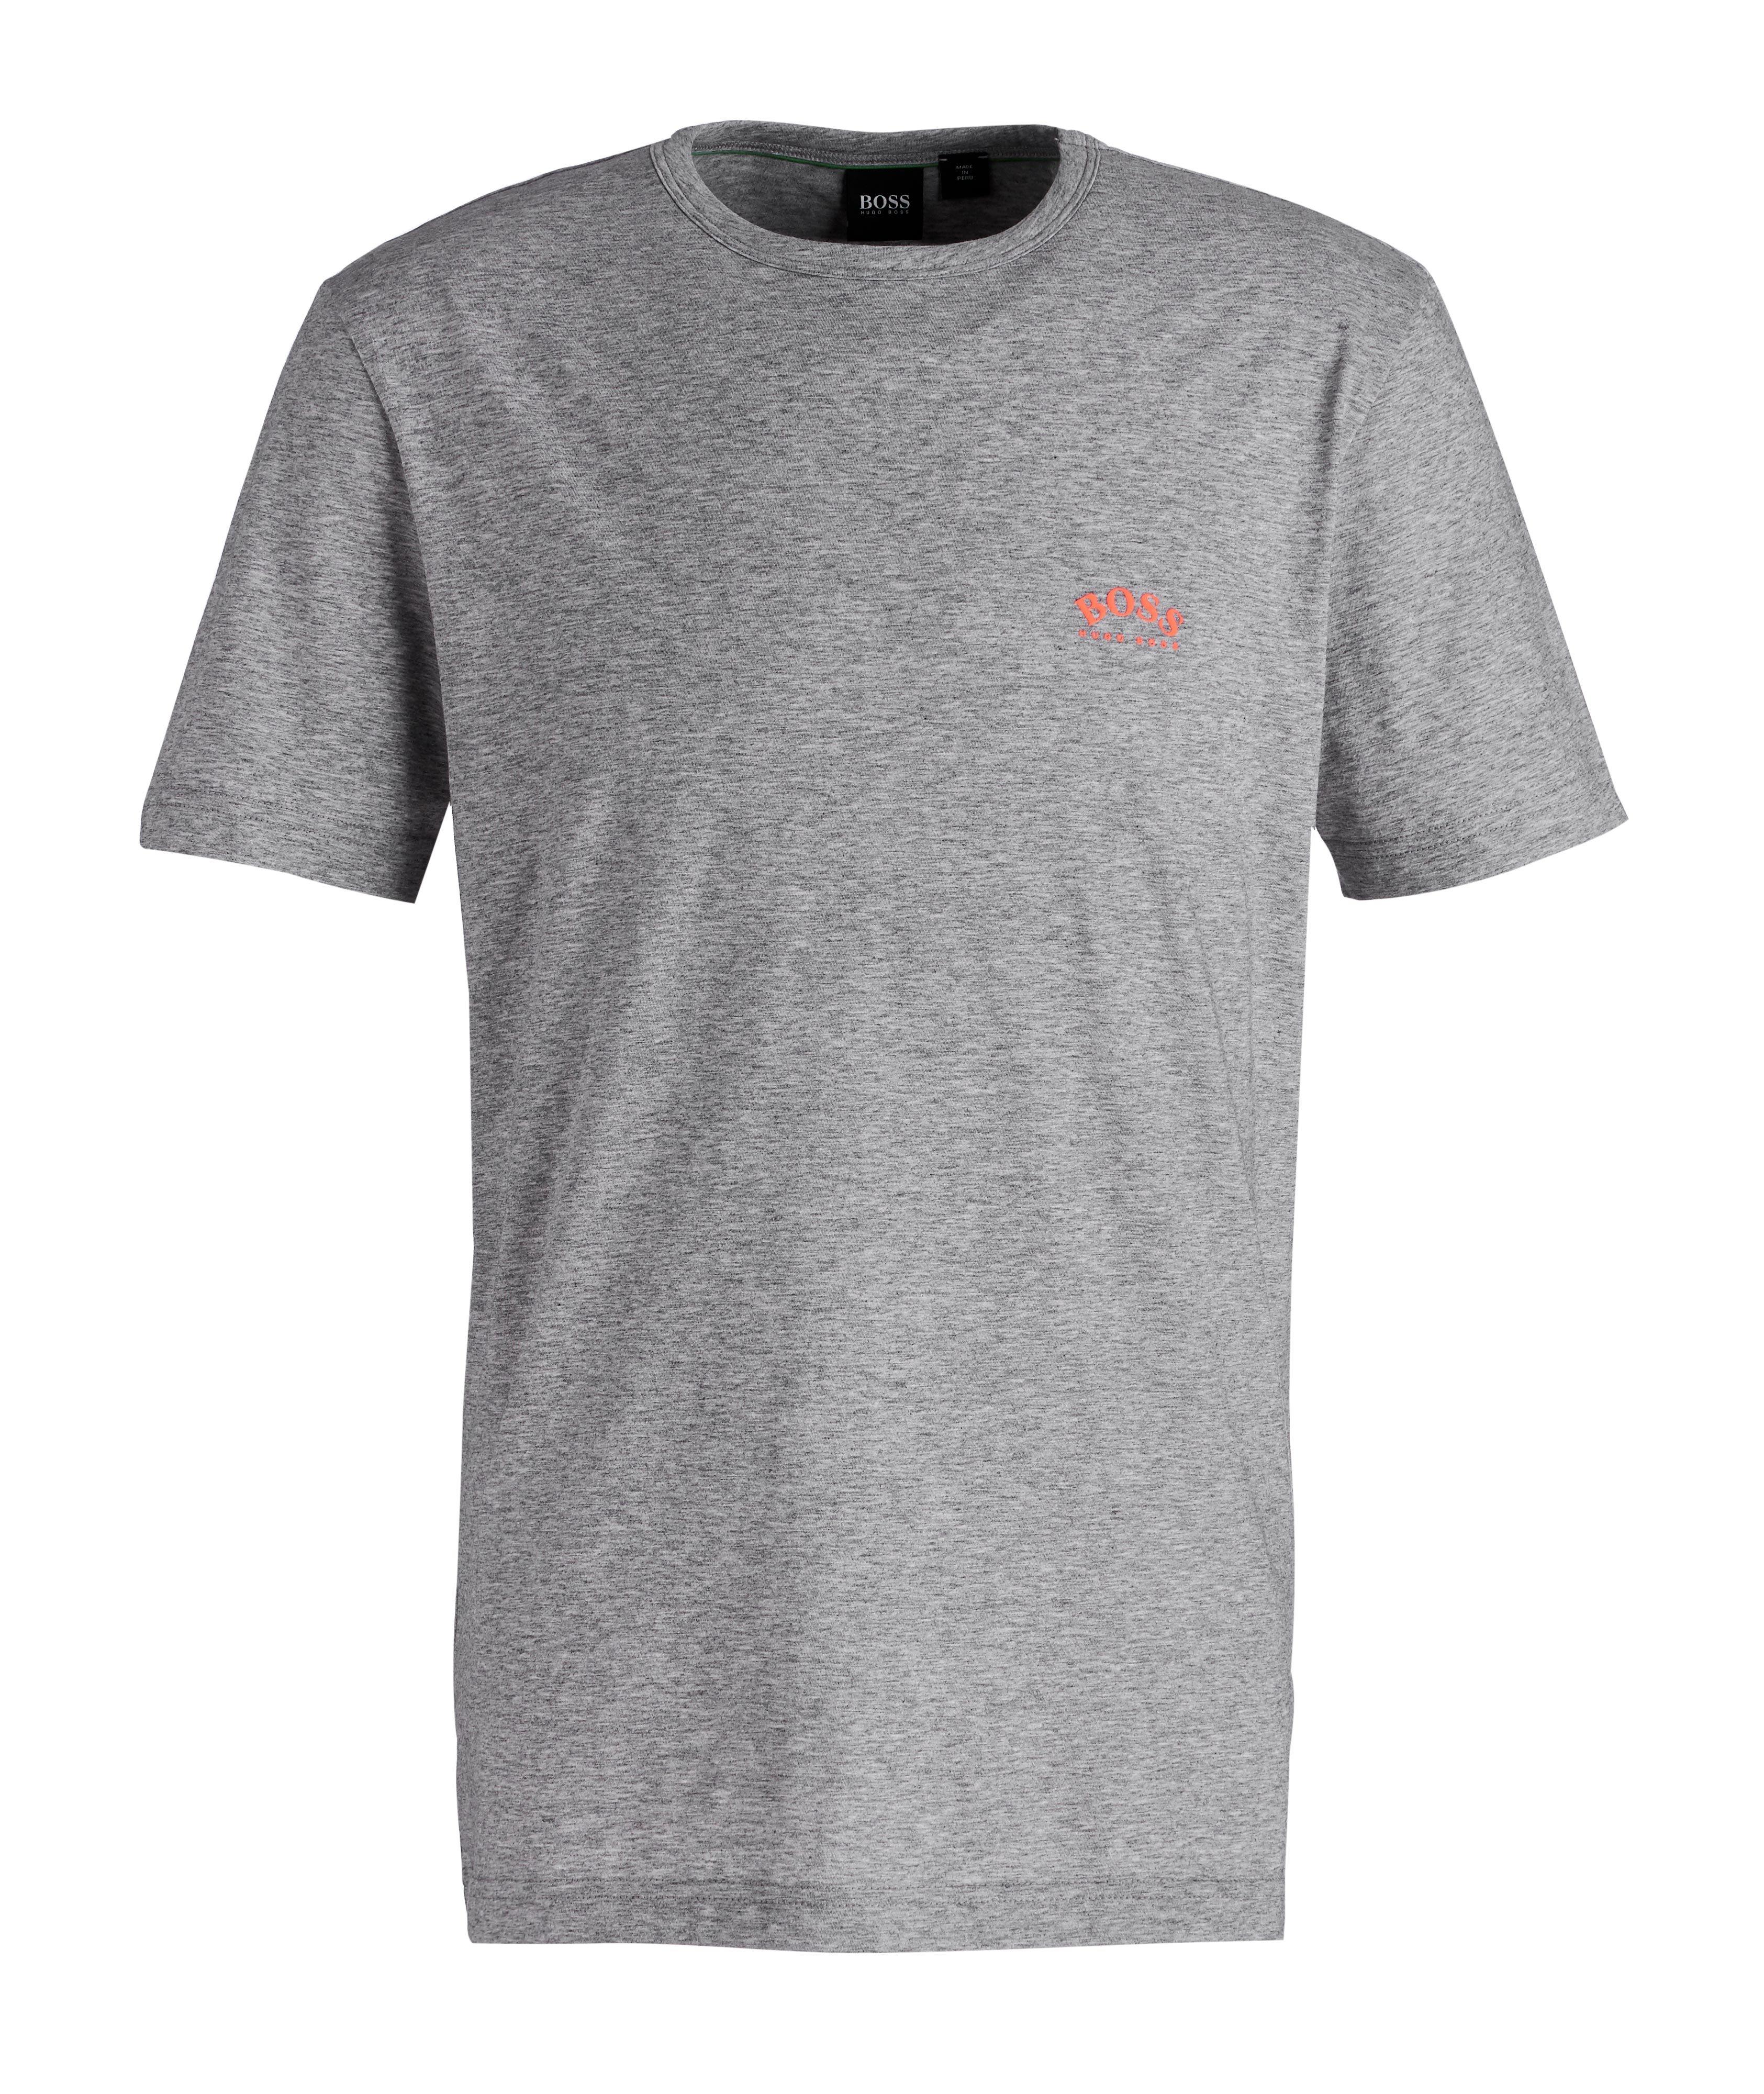 Curved Cotton T-Shirt image 0